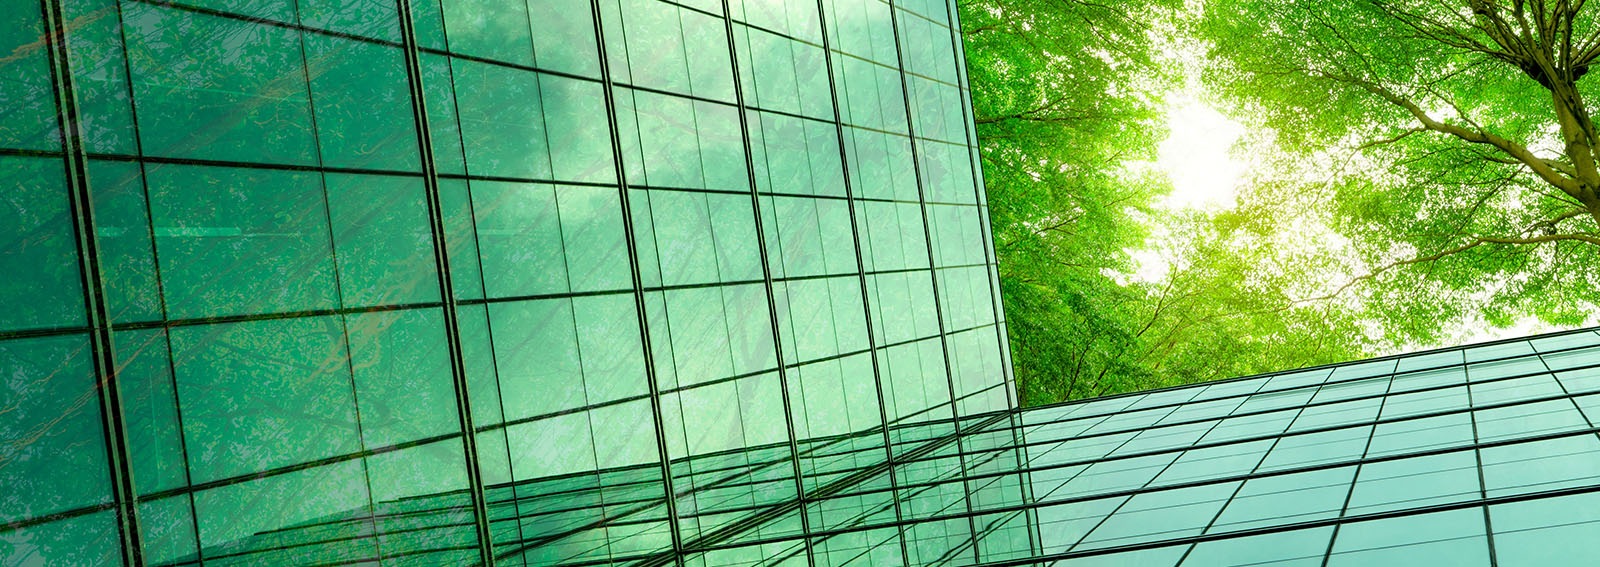 Modern glass building with green tree branches with leaves